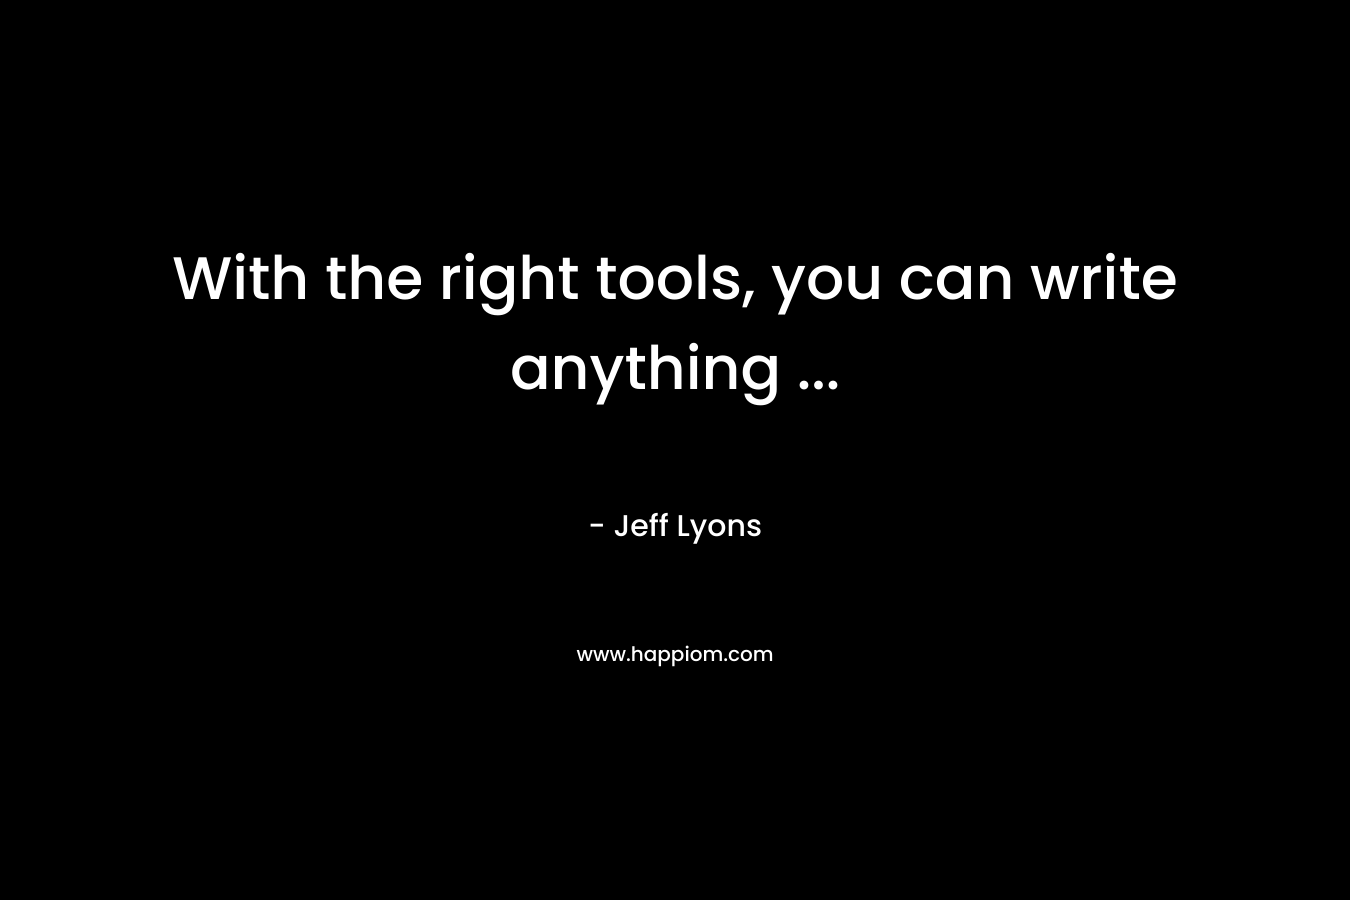 With the right tools, you can write anything ...